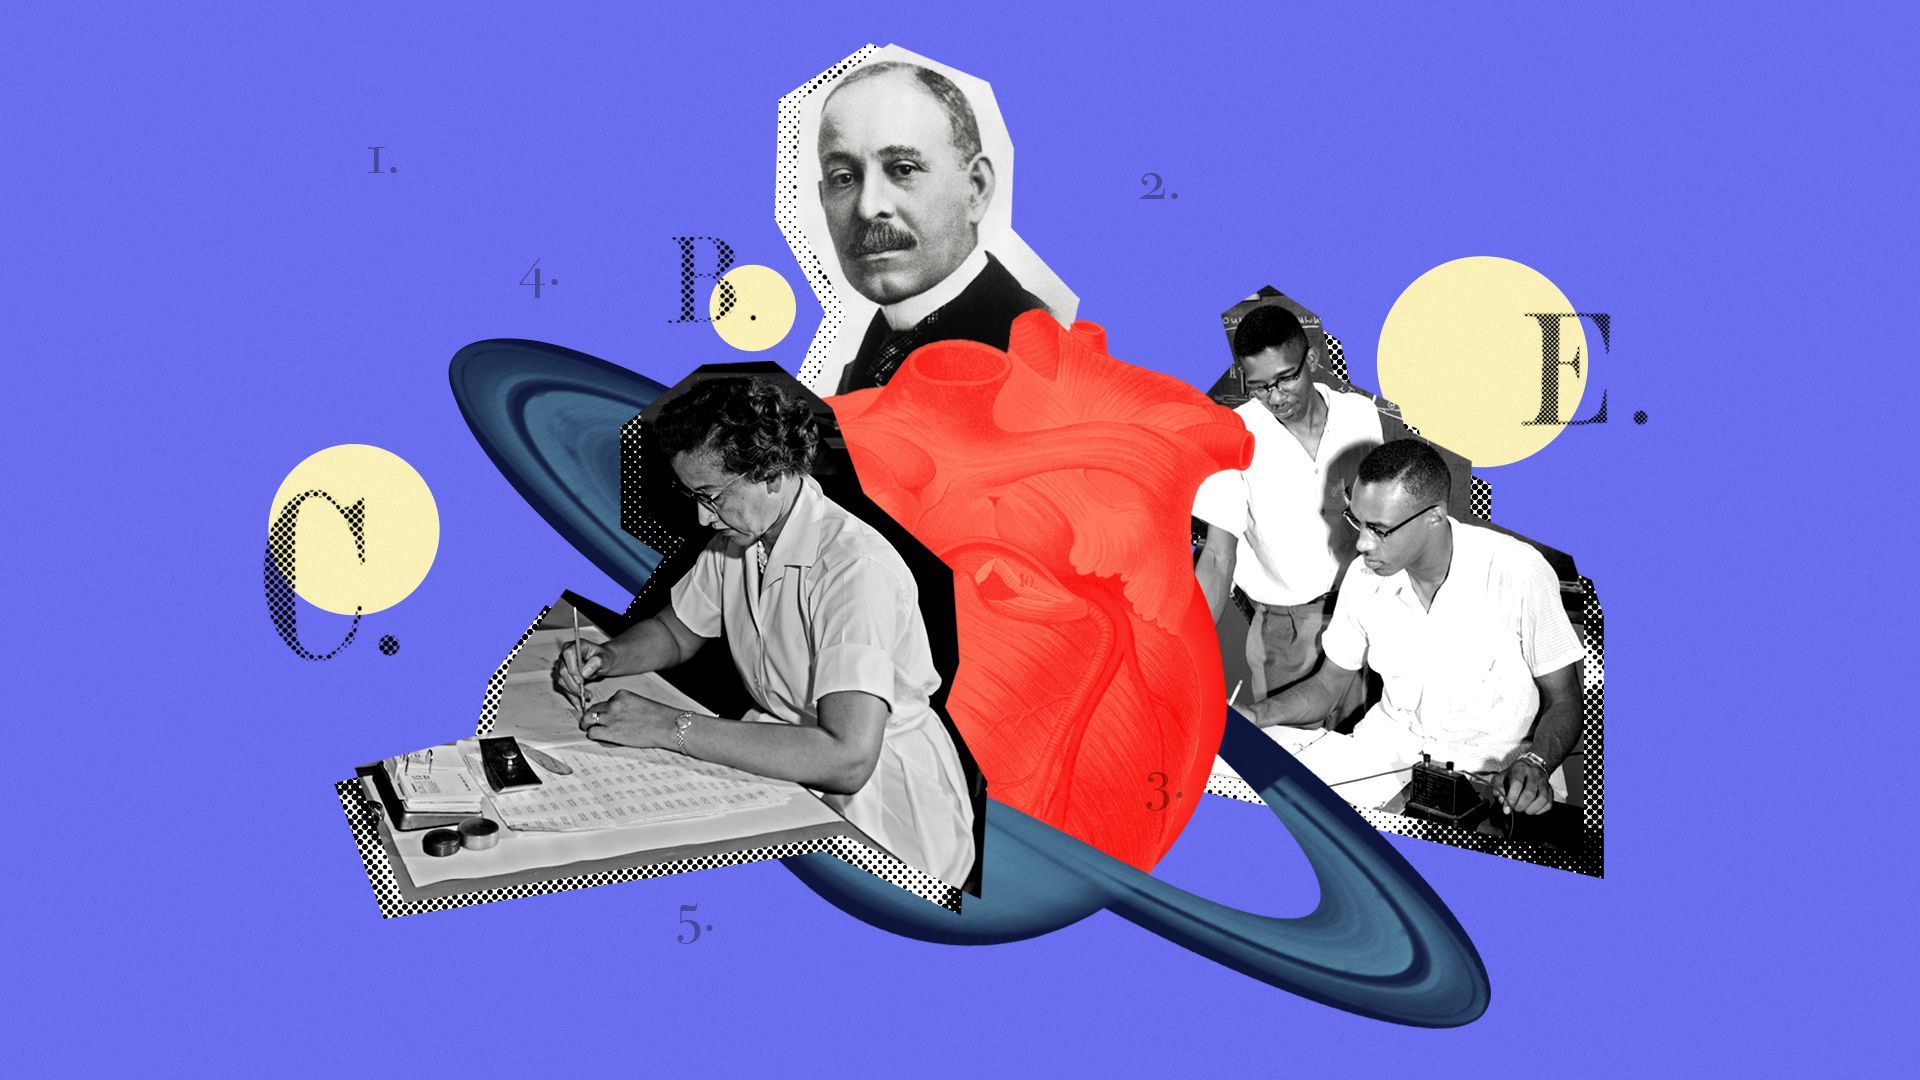 Photo illustration of a medical illustration of a heart and Saturn surrounded by Katherine Johnson, Daniel Hale Williams, and two students studying physics